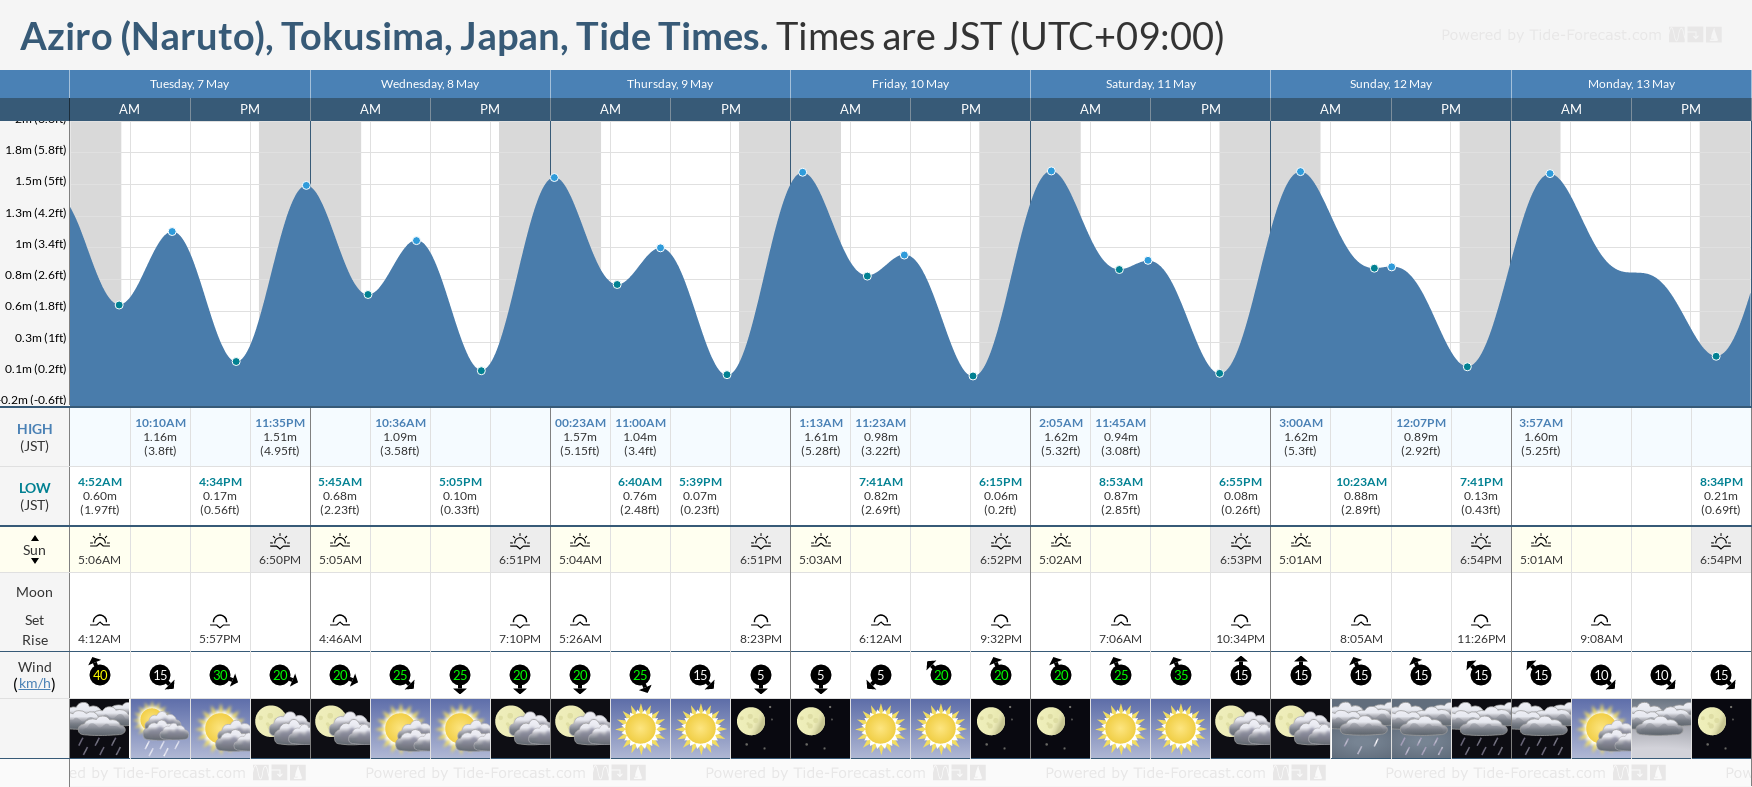 Aziro (Naruto), Tokusima, Japan Tide Chart including high and low tide tide times for the next 7 days